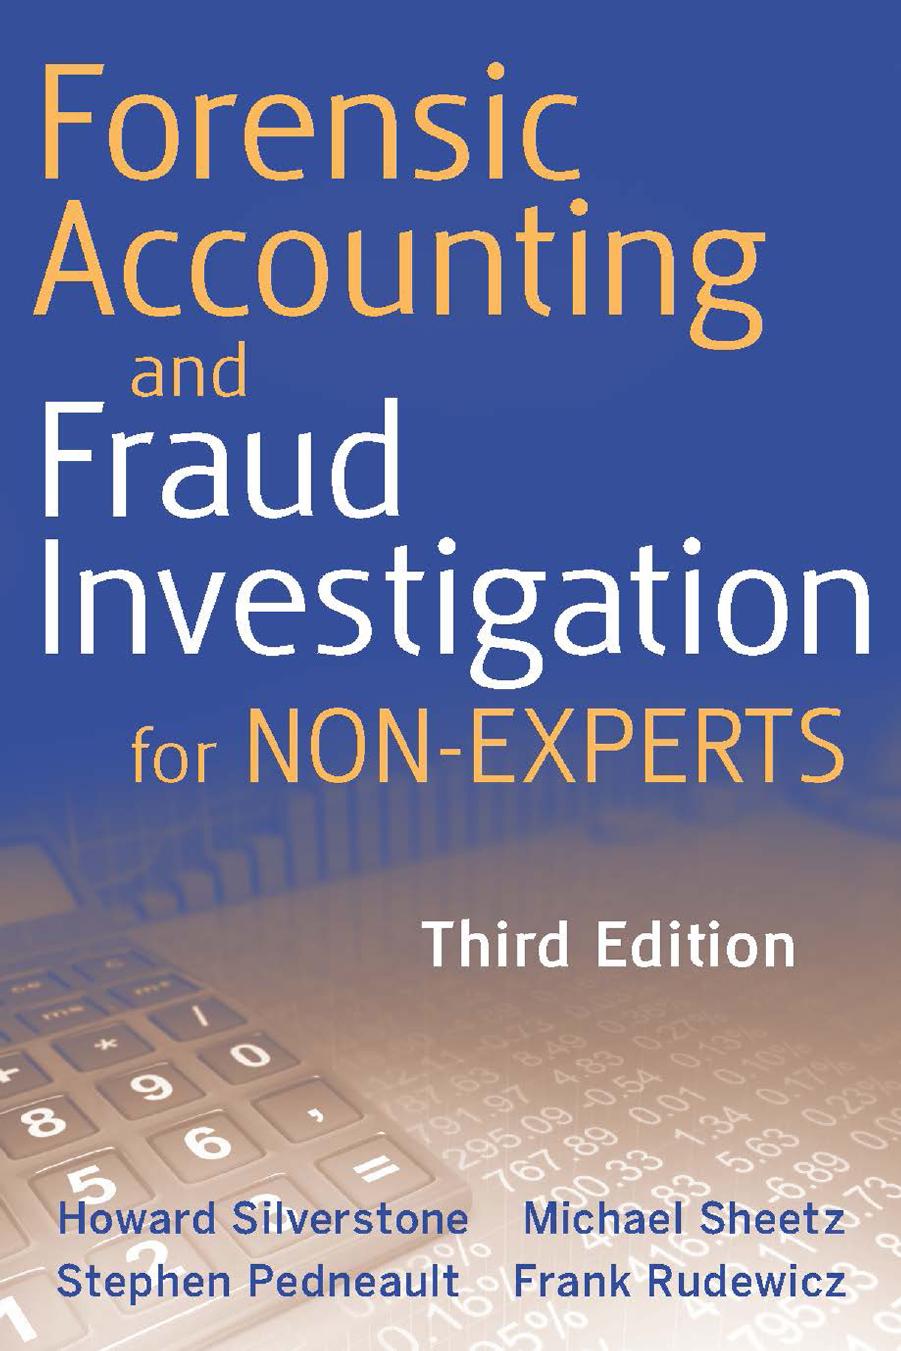 Forensic Accounting and Fraud Investigation for Non-Experts (3rd Edition)